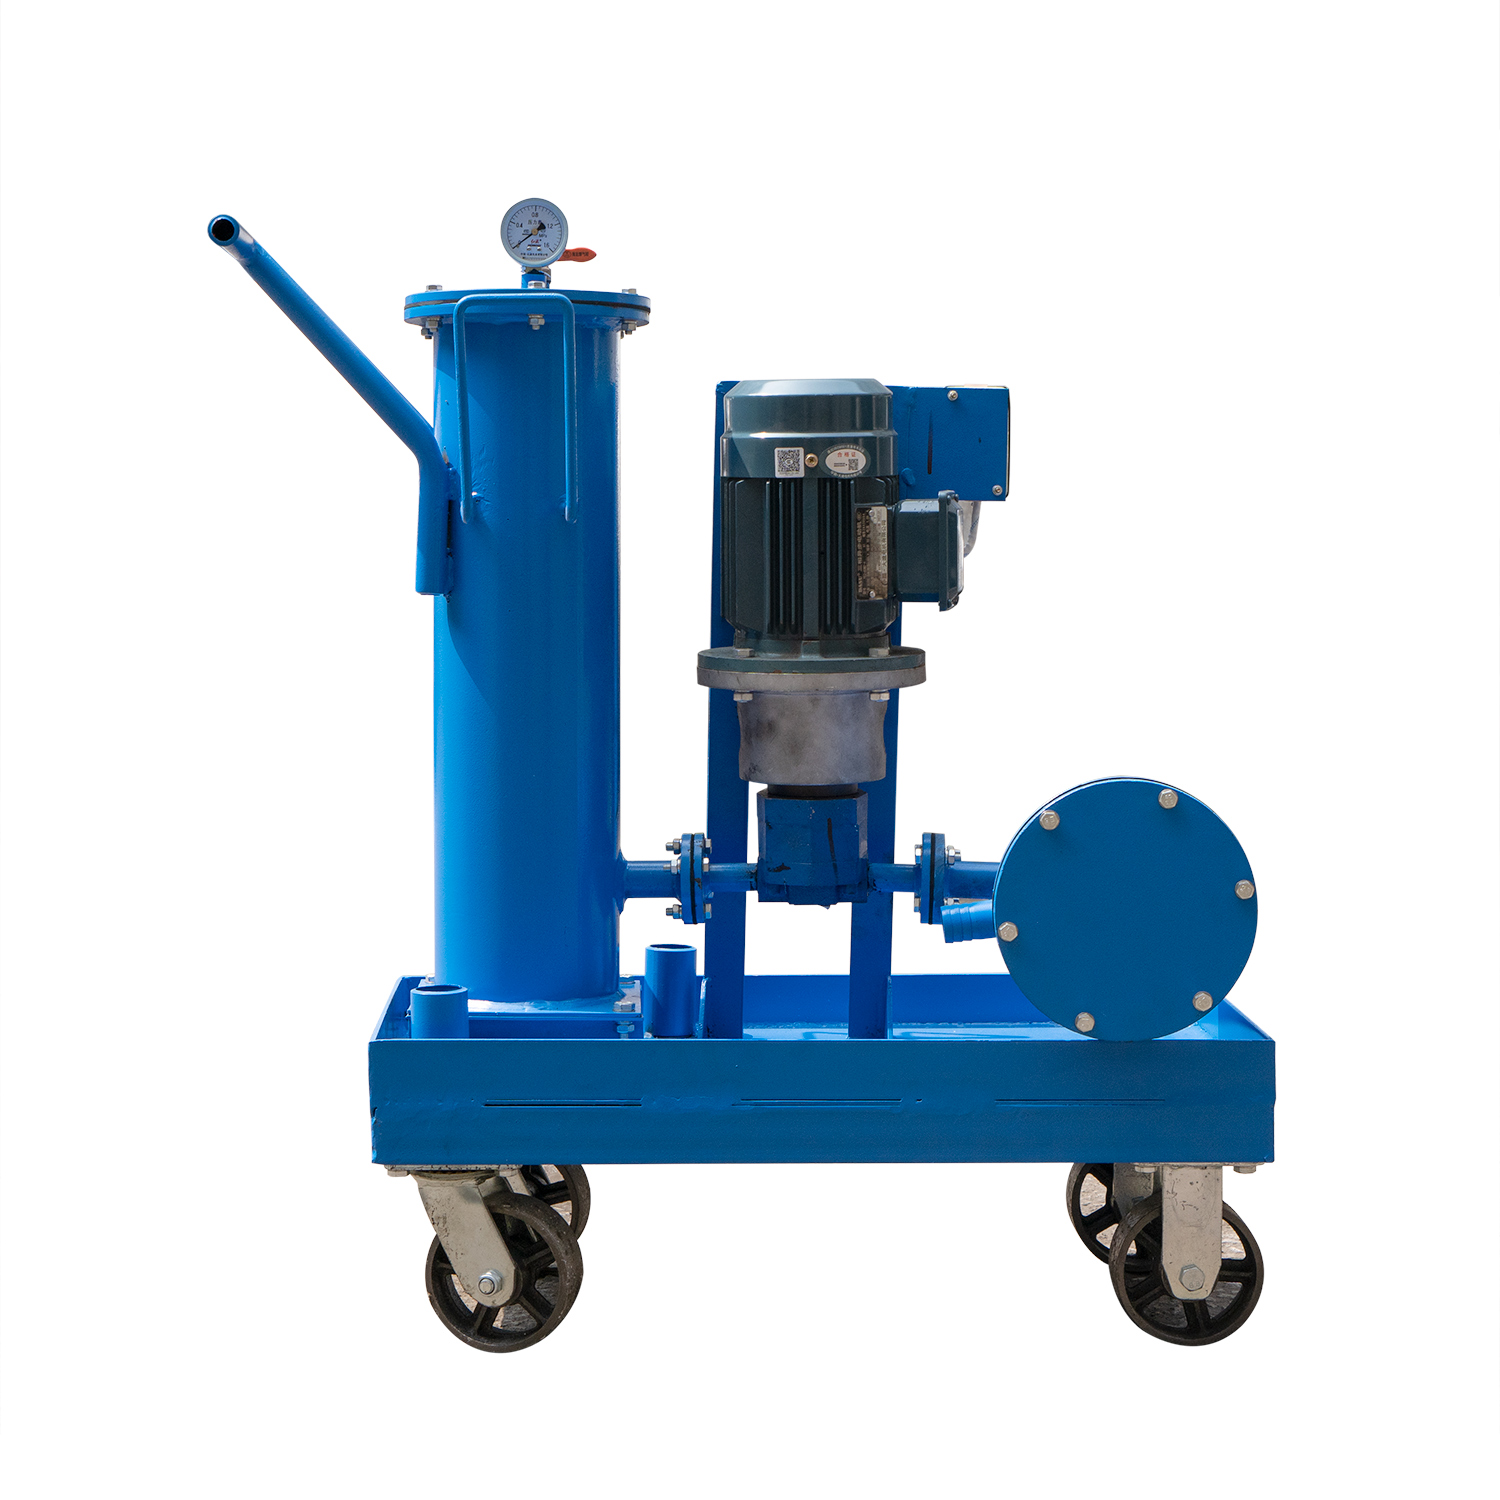 JL-70 Portable Oil Filter Machine Is On the Way to Customer Site